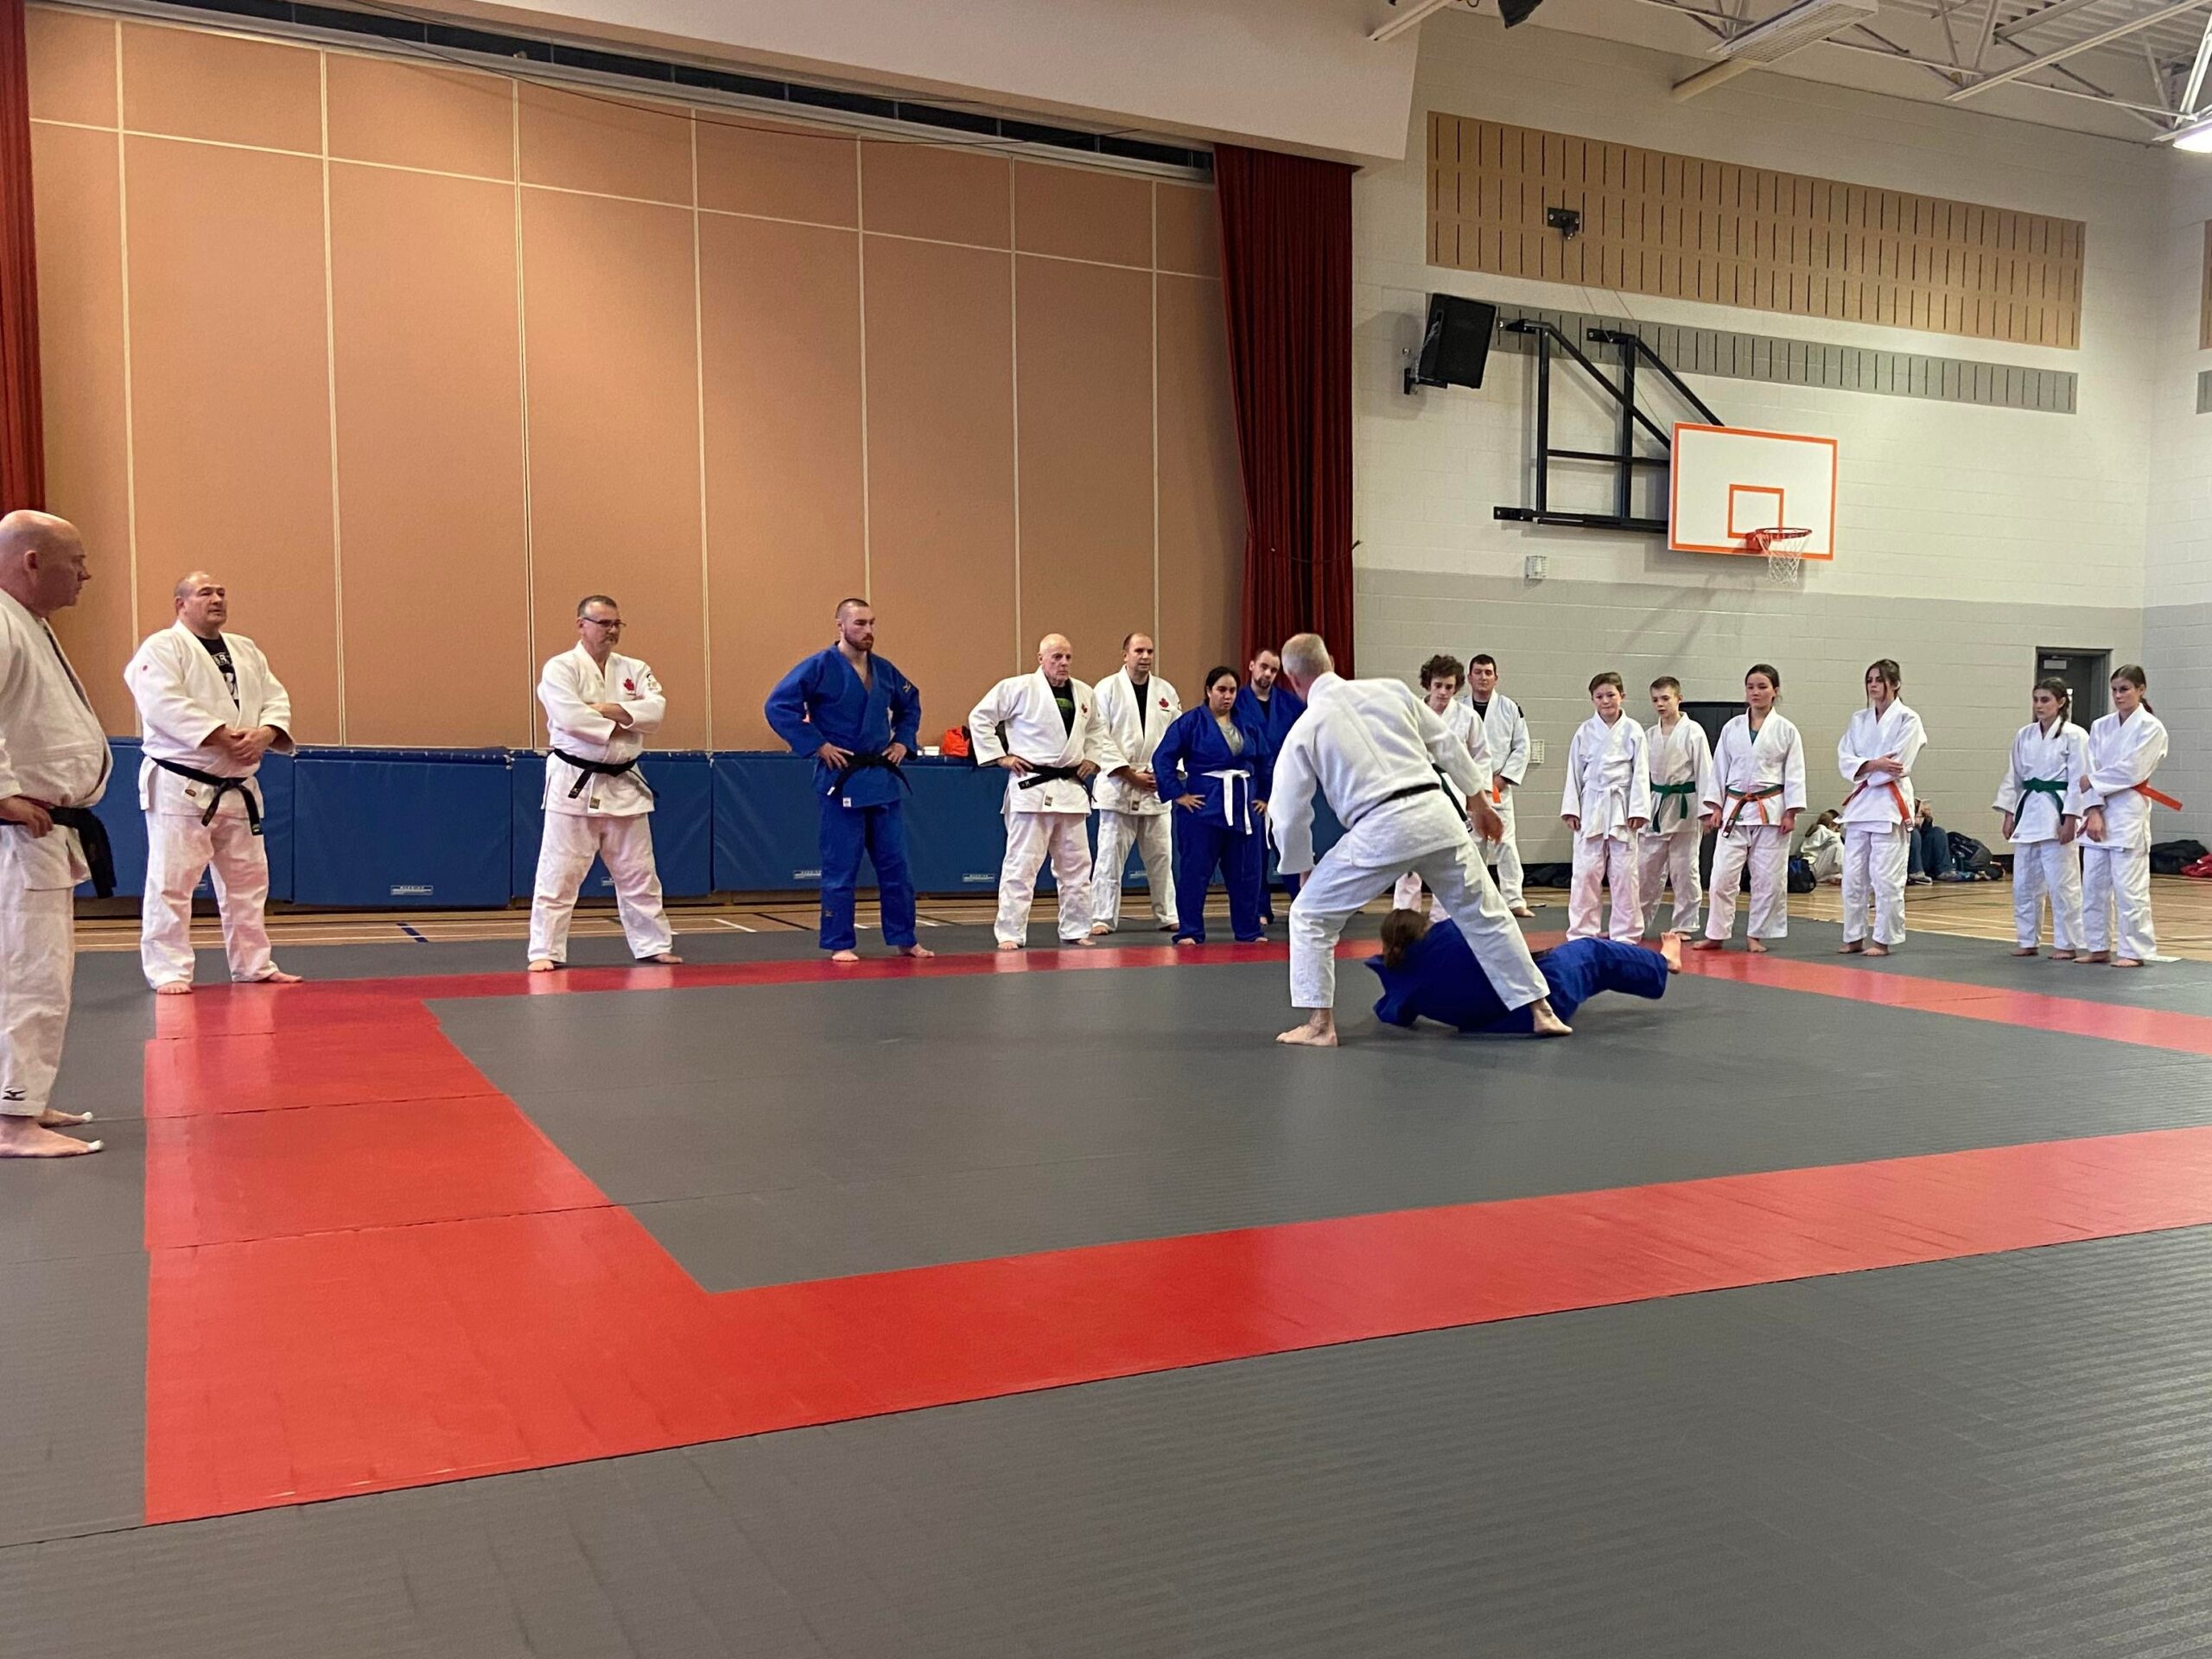 Borderland Judo Club hosts a successful Judo Clinic. Here’s how it all began